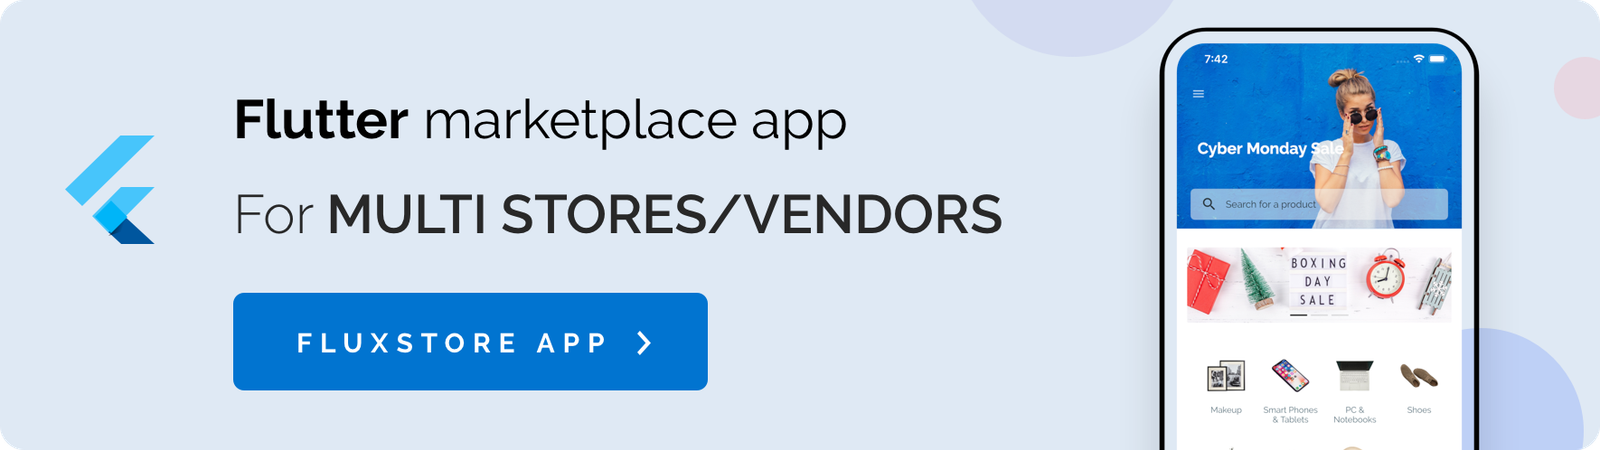 MStore Opencart - the complete react native e-commerce app (Expo version) - 8